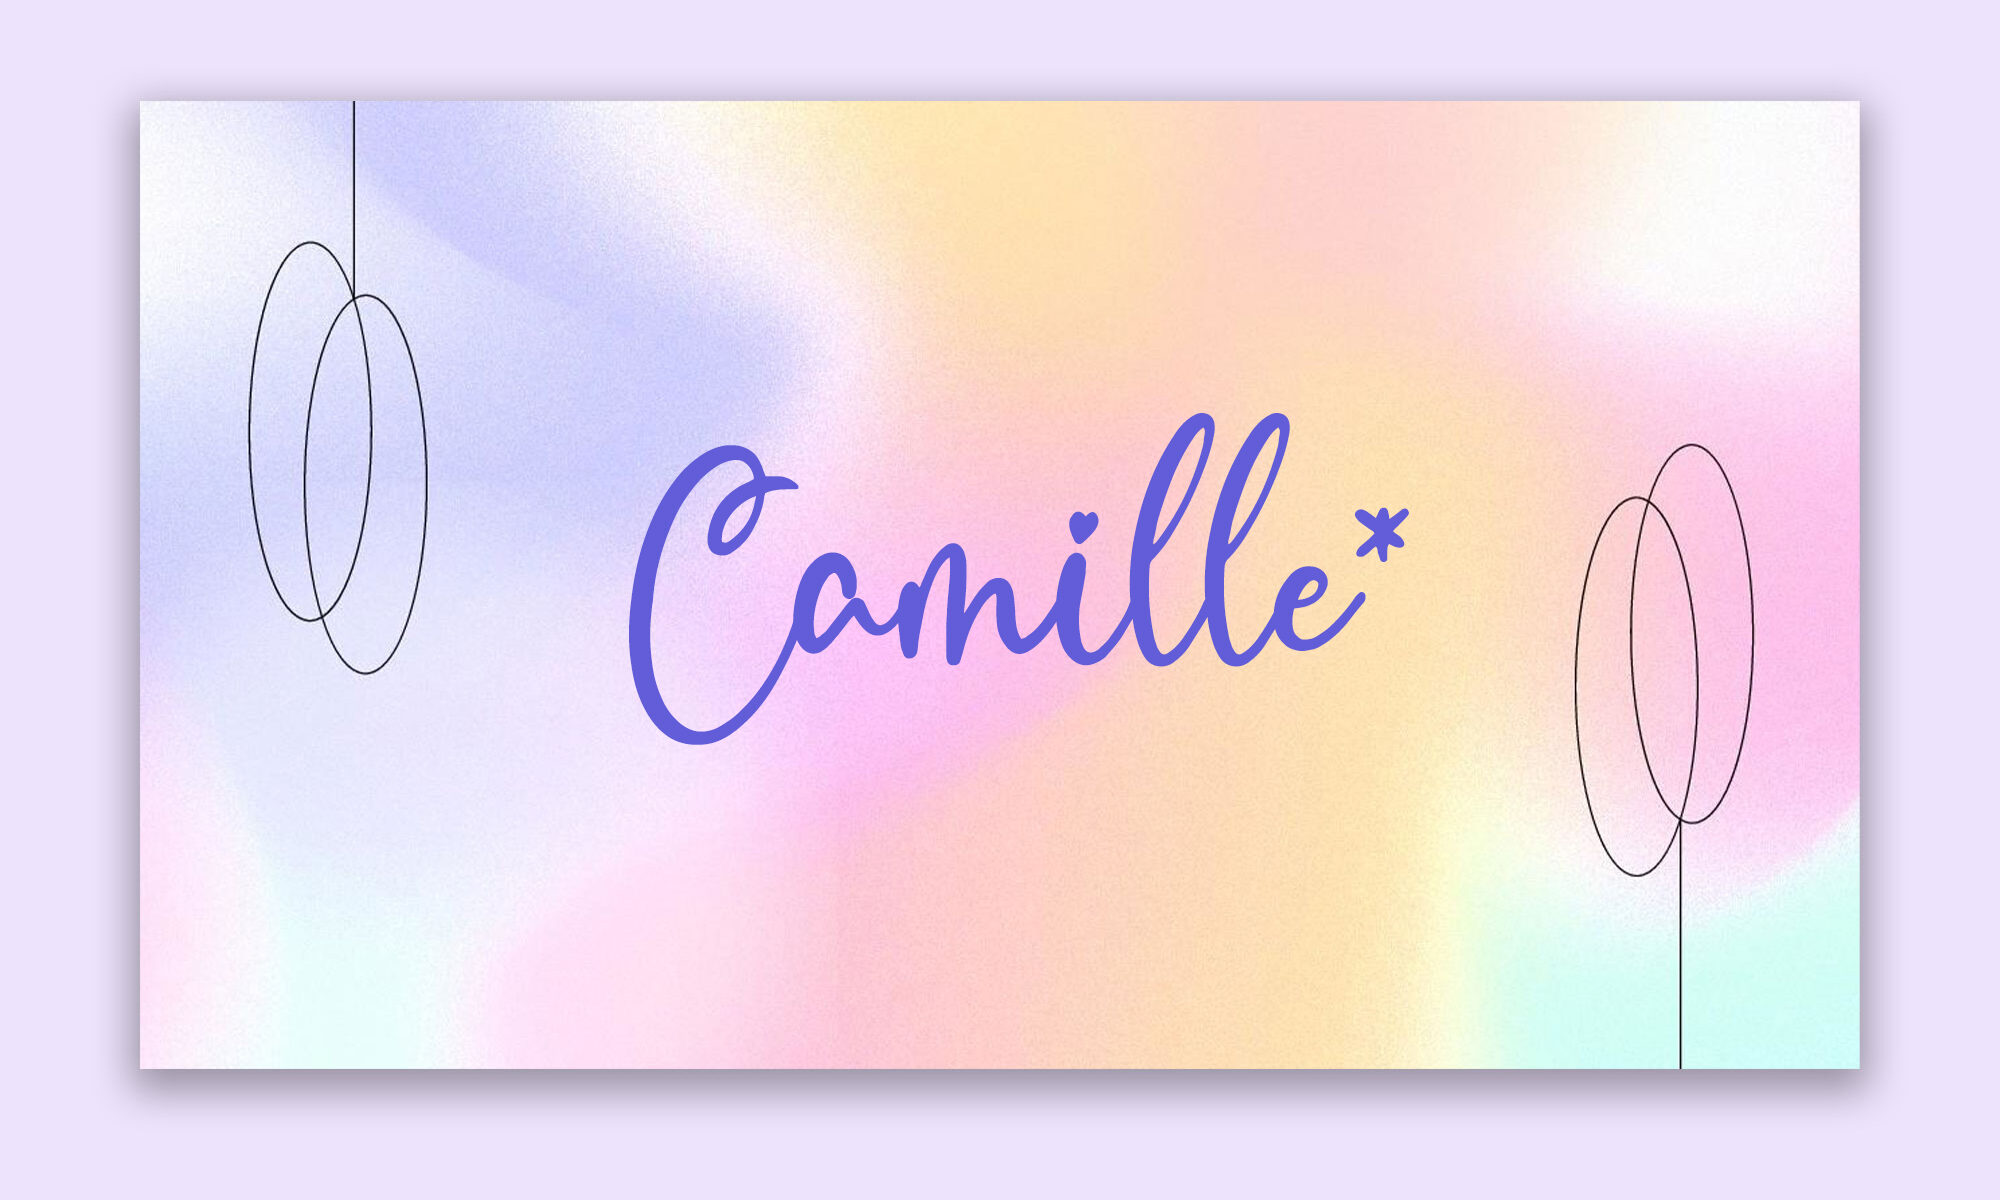 Camille*